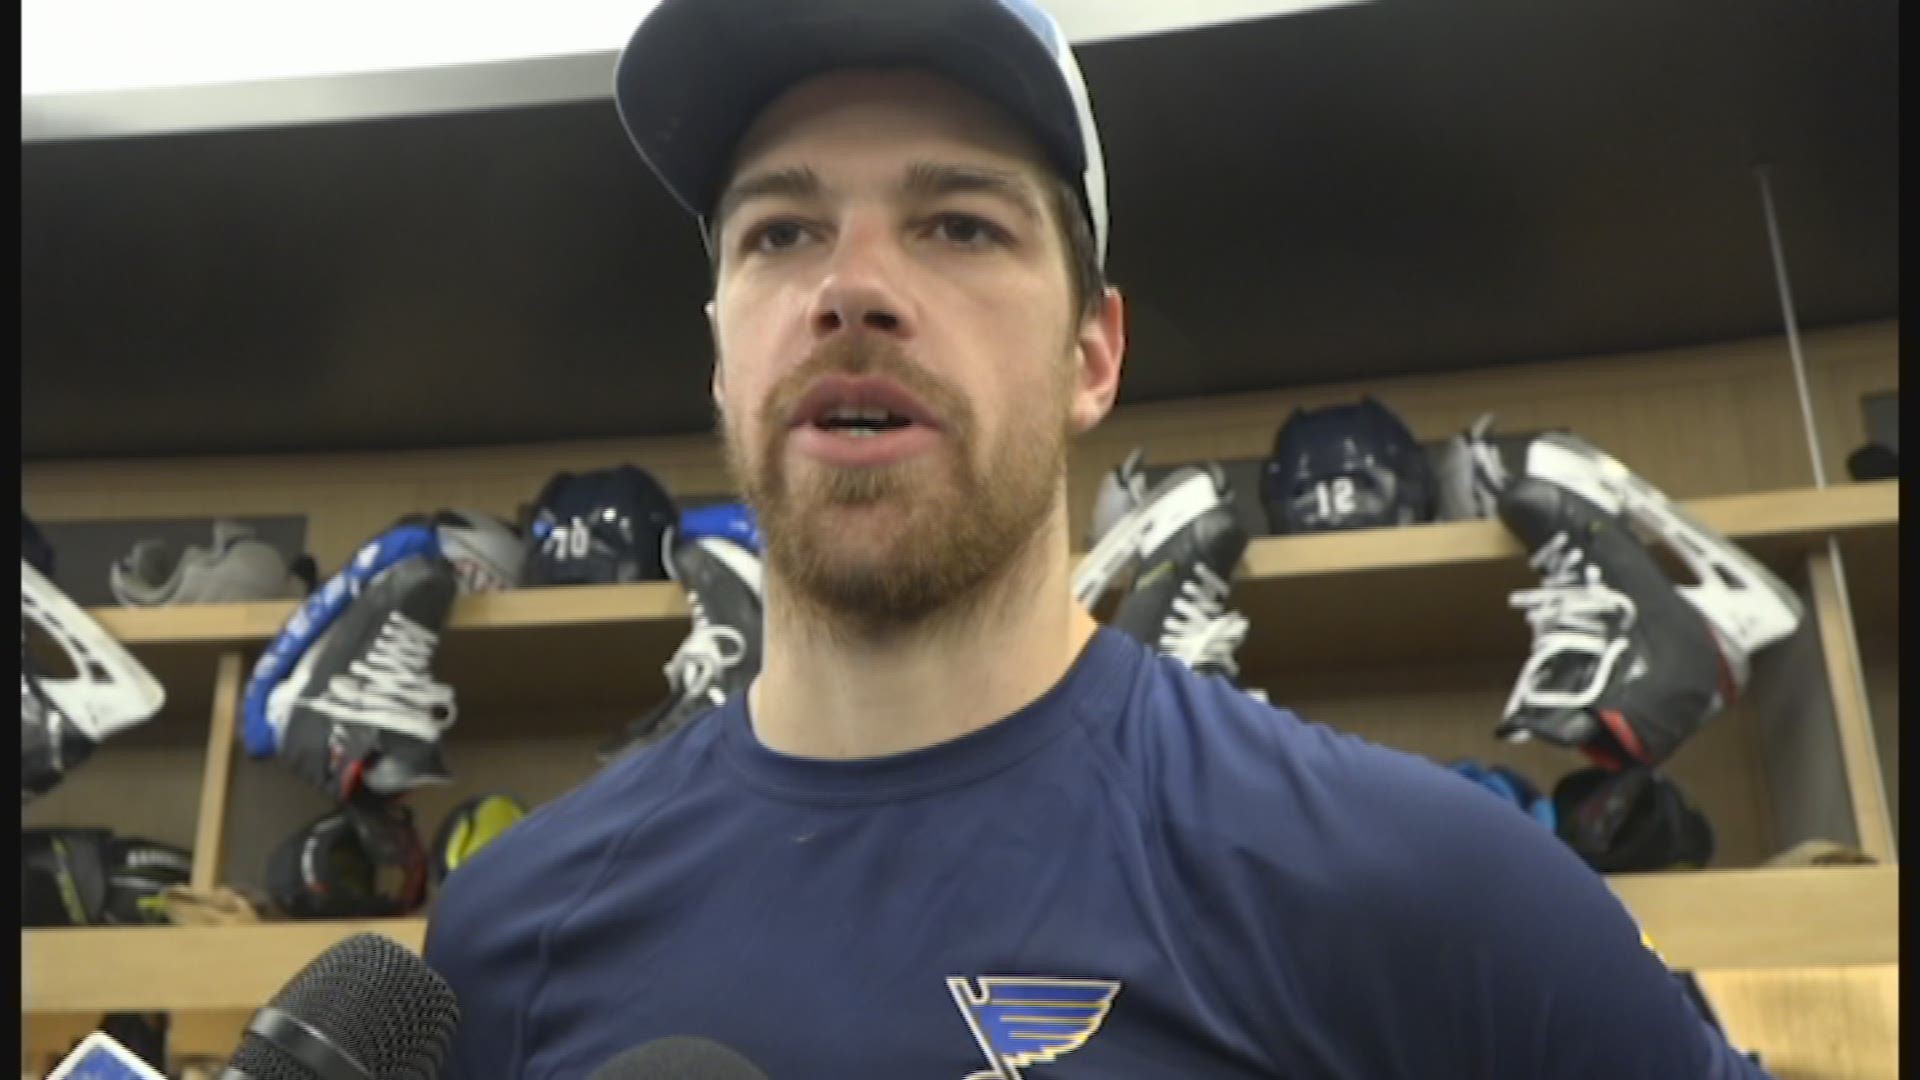 The Blues' forward is in the middle of a career-high six game point streak, and fitting right in with linemates Ryan O'Reilly and David Perron.